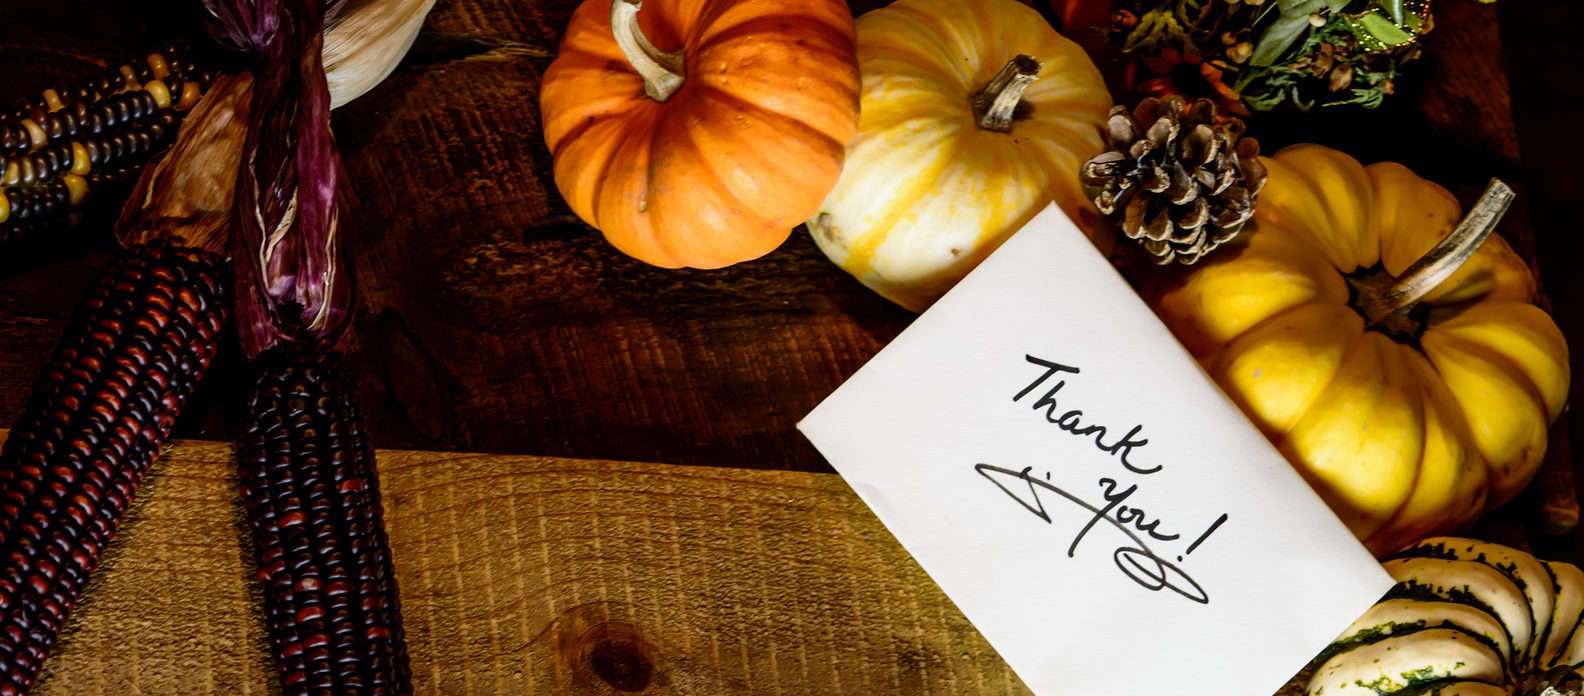 10 Creative Ideas for Your Office Thanksgiving Celebration